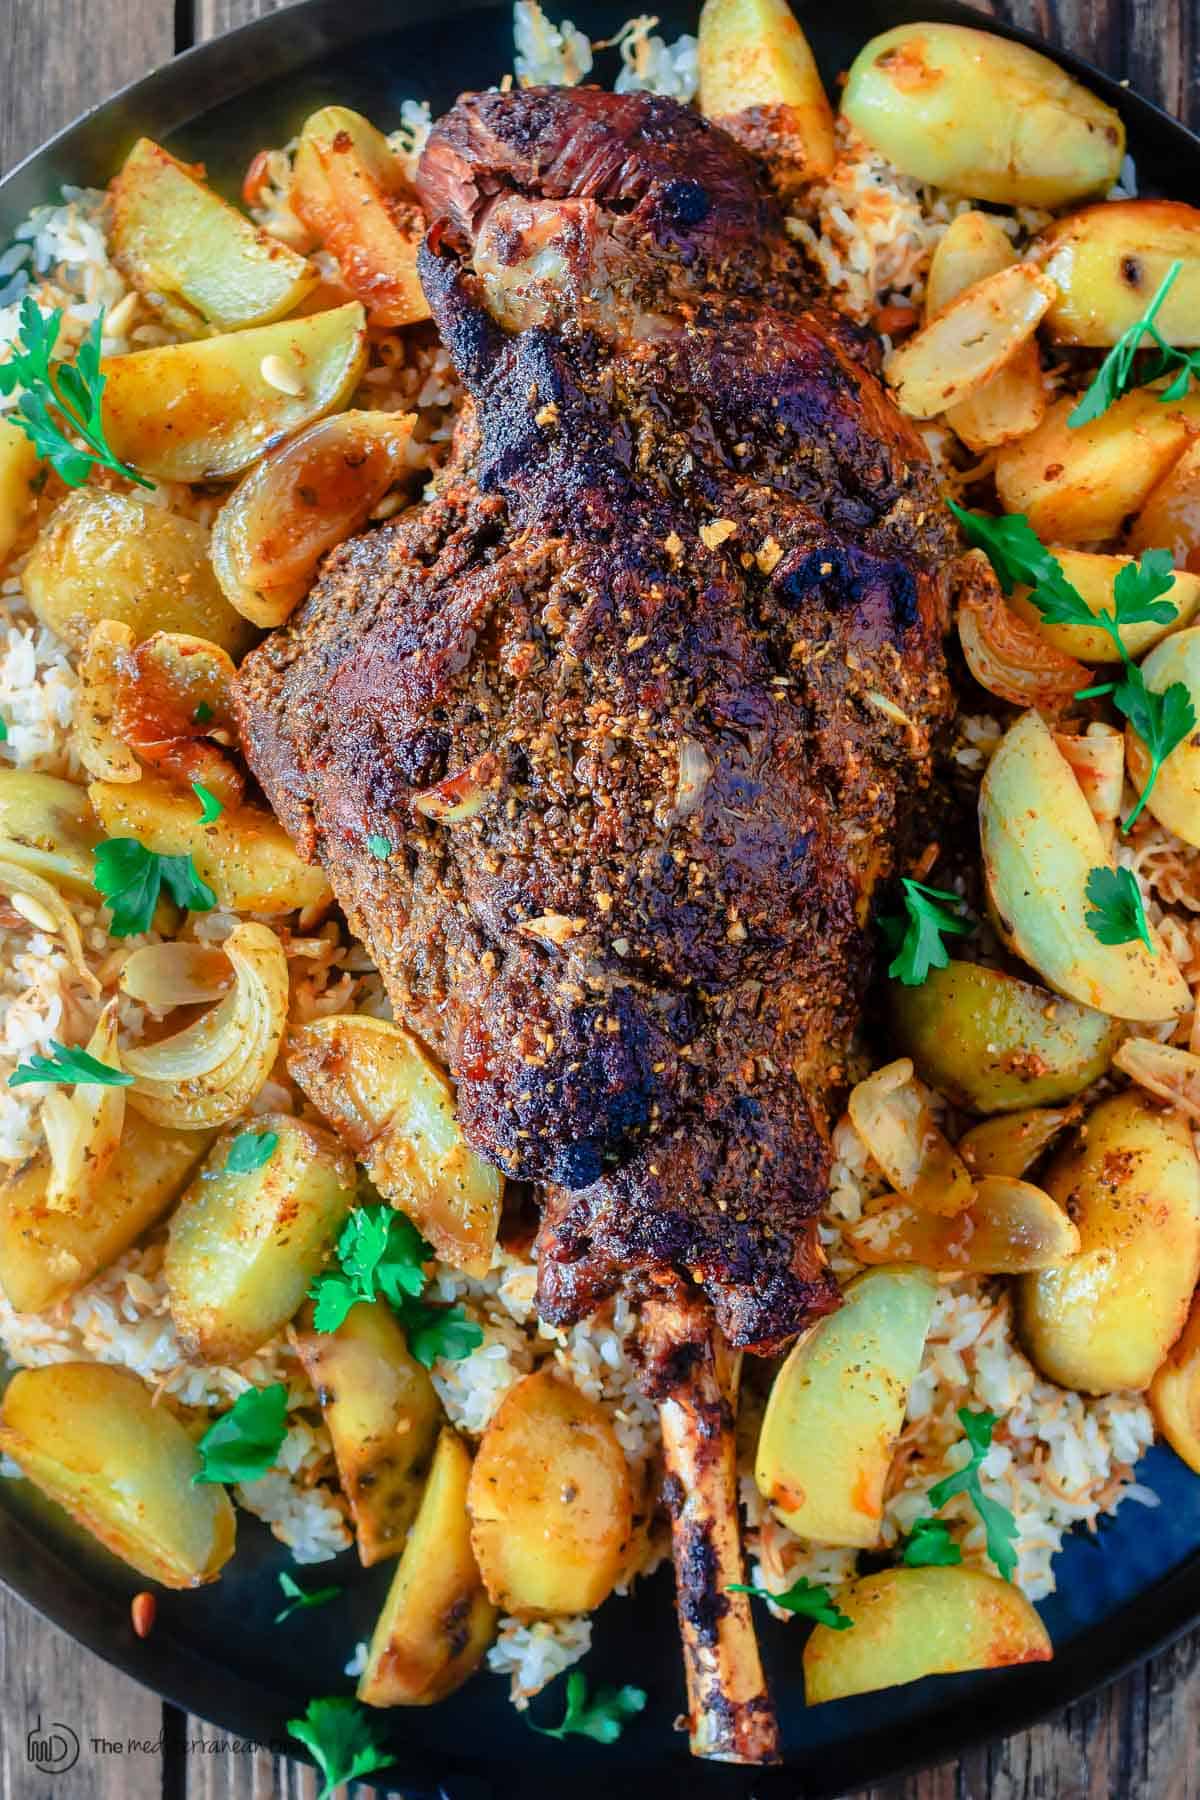 Roasted leg of lamb with potatoes over a bed of rice